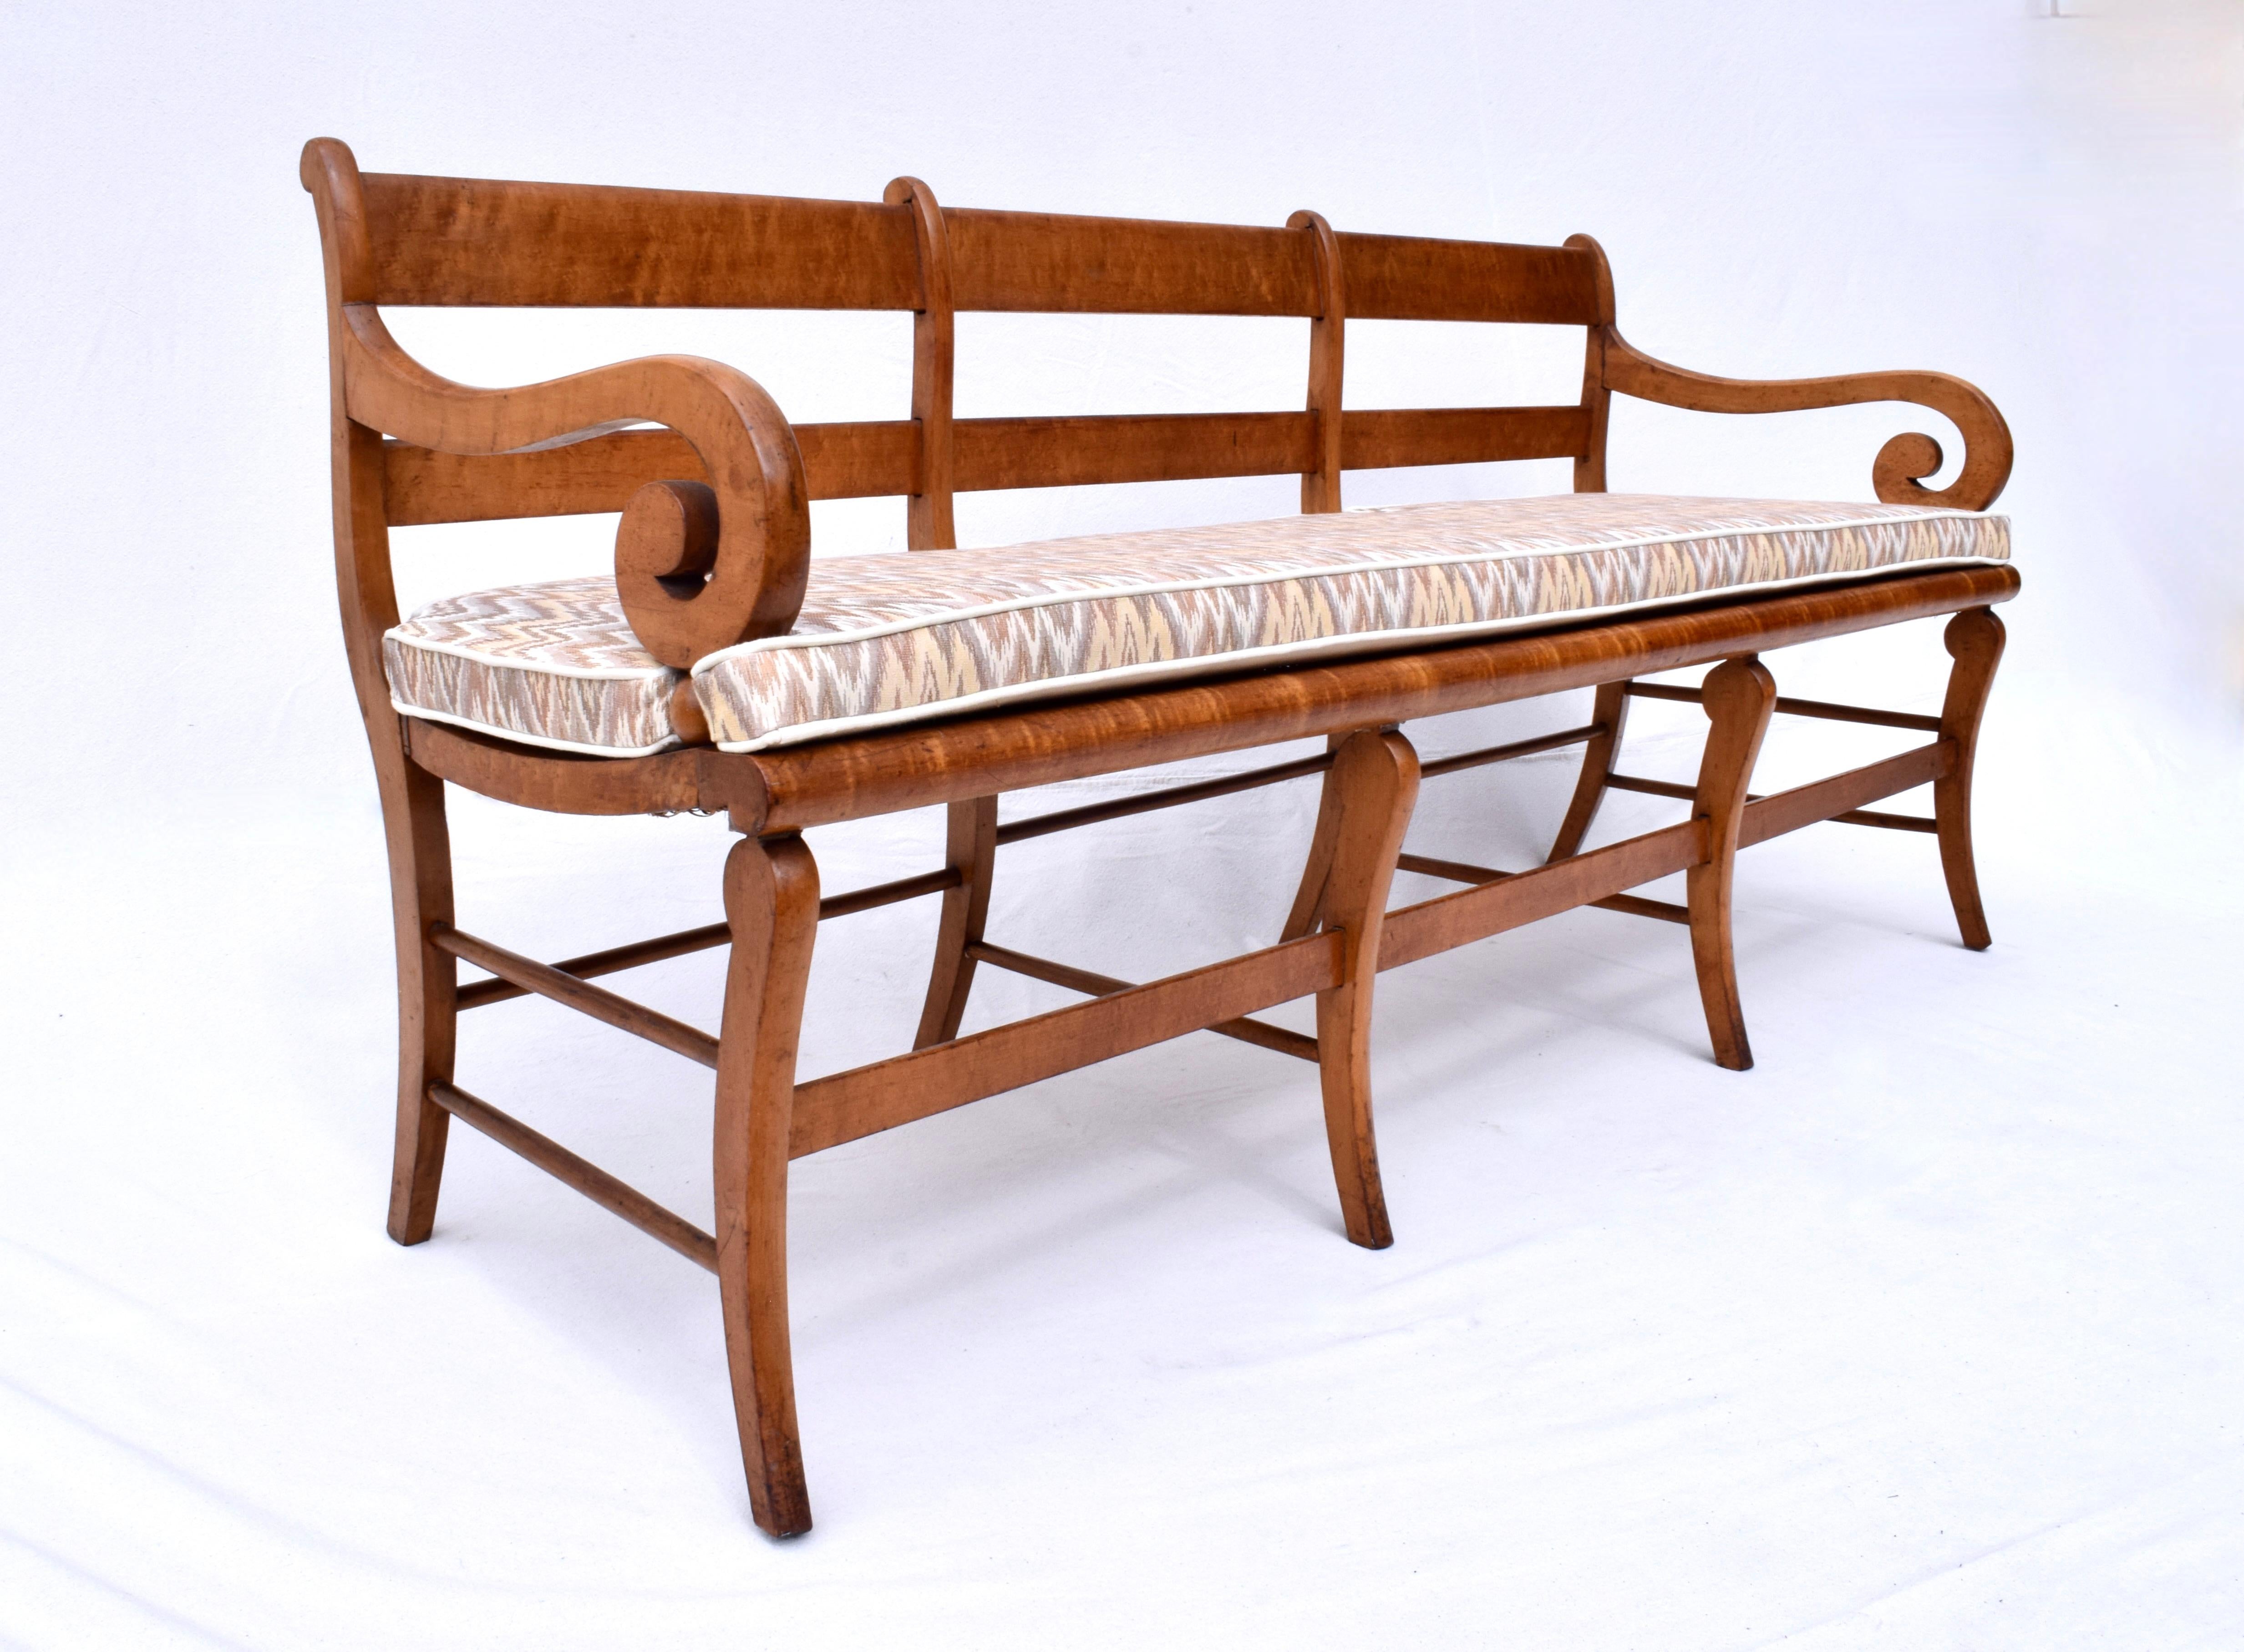 Hand-Woven Early 19th Century Bird’S-Eye Maple Sabre Leg Caned Bench For Sale